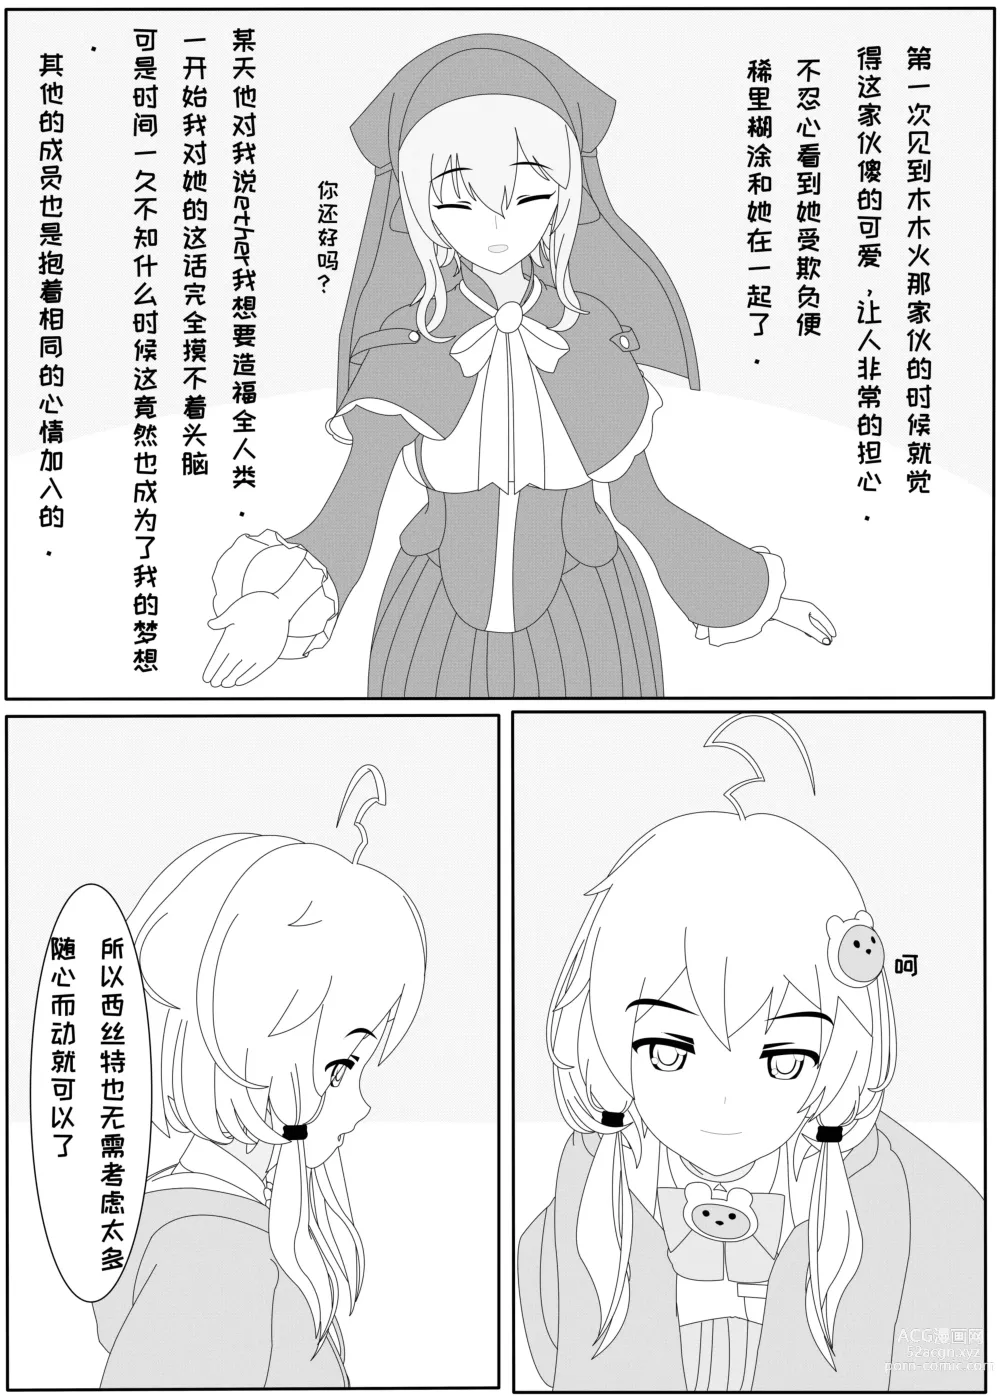 Page 11 of doujinshi 鲸之恋2（西丝特Xether）